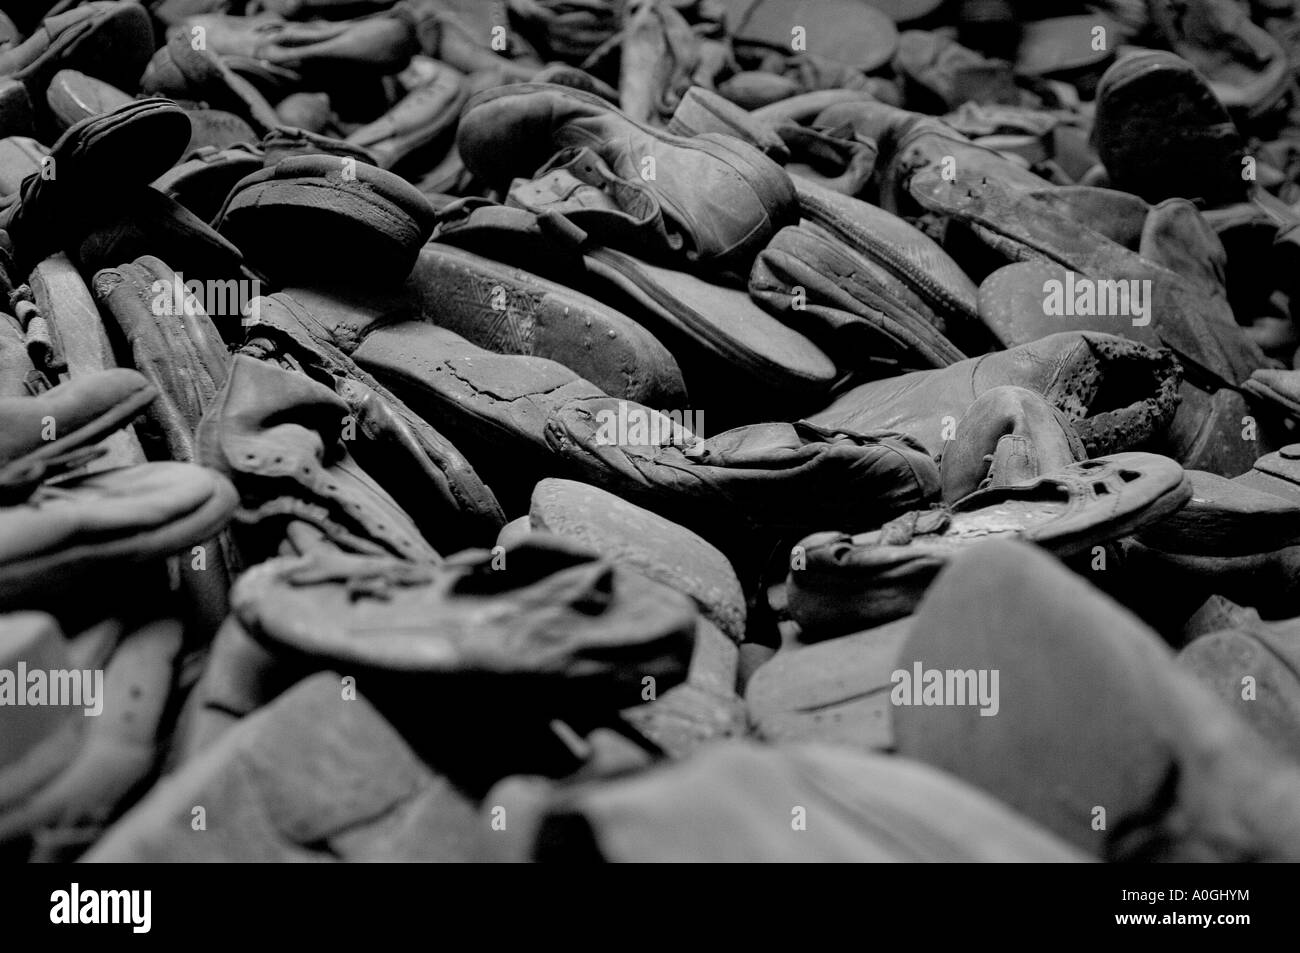 Depressing pile of shoes, kept by the Nazis after murdering their victims at Auschwitz - Birkenau concentration camp, Poland. Stock Photo